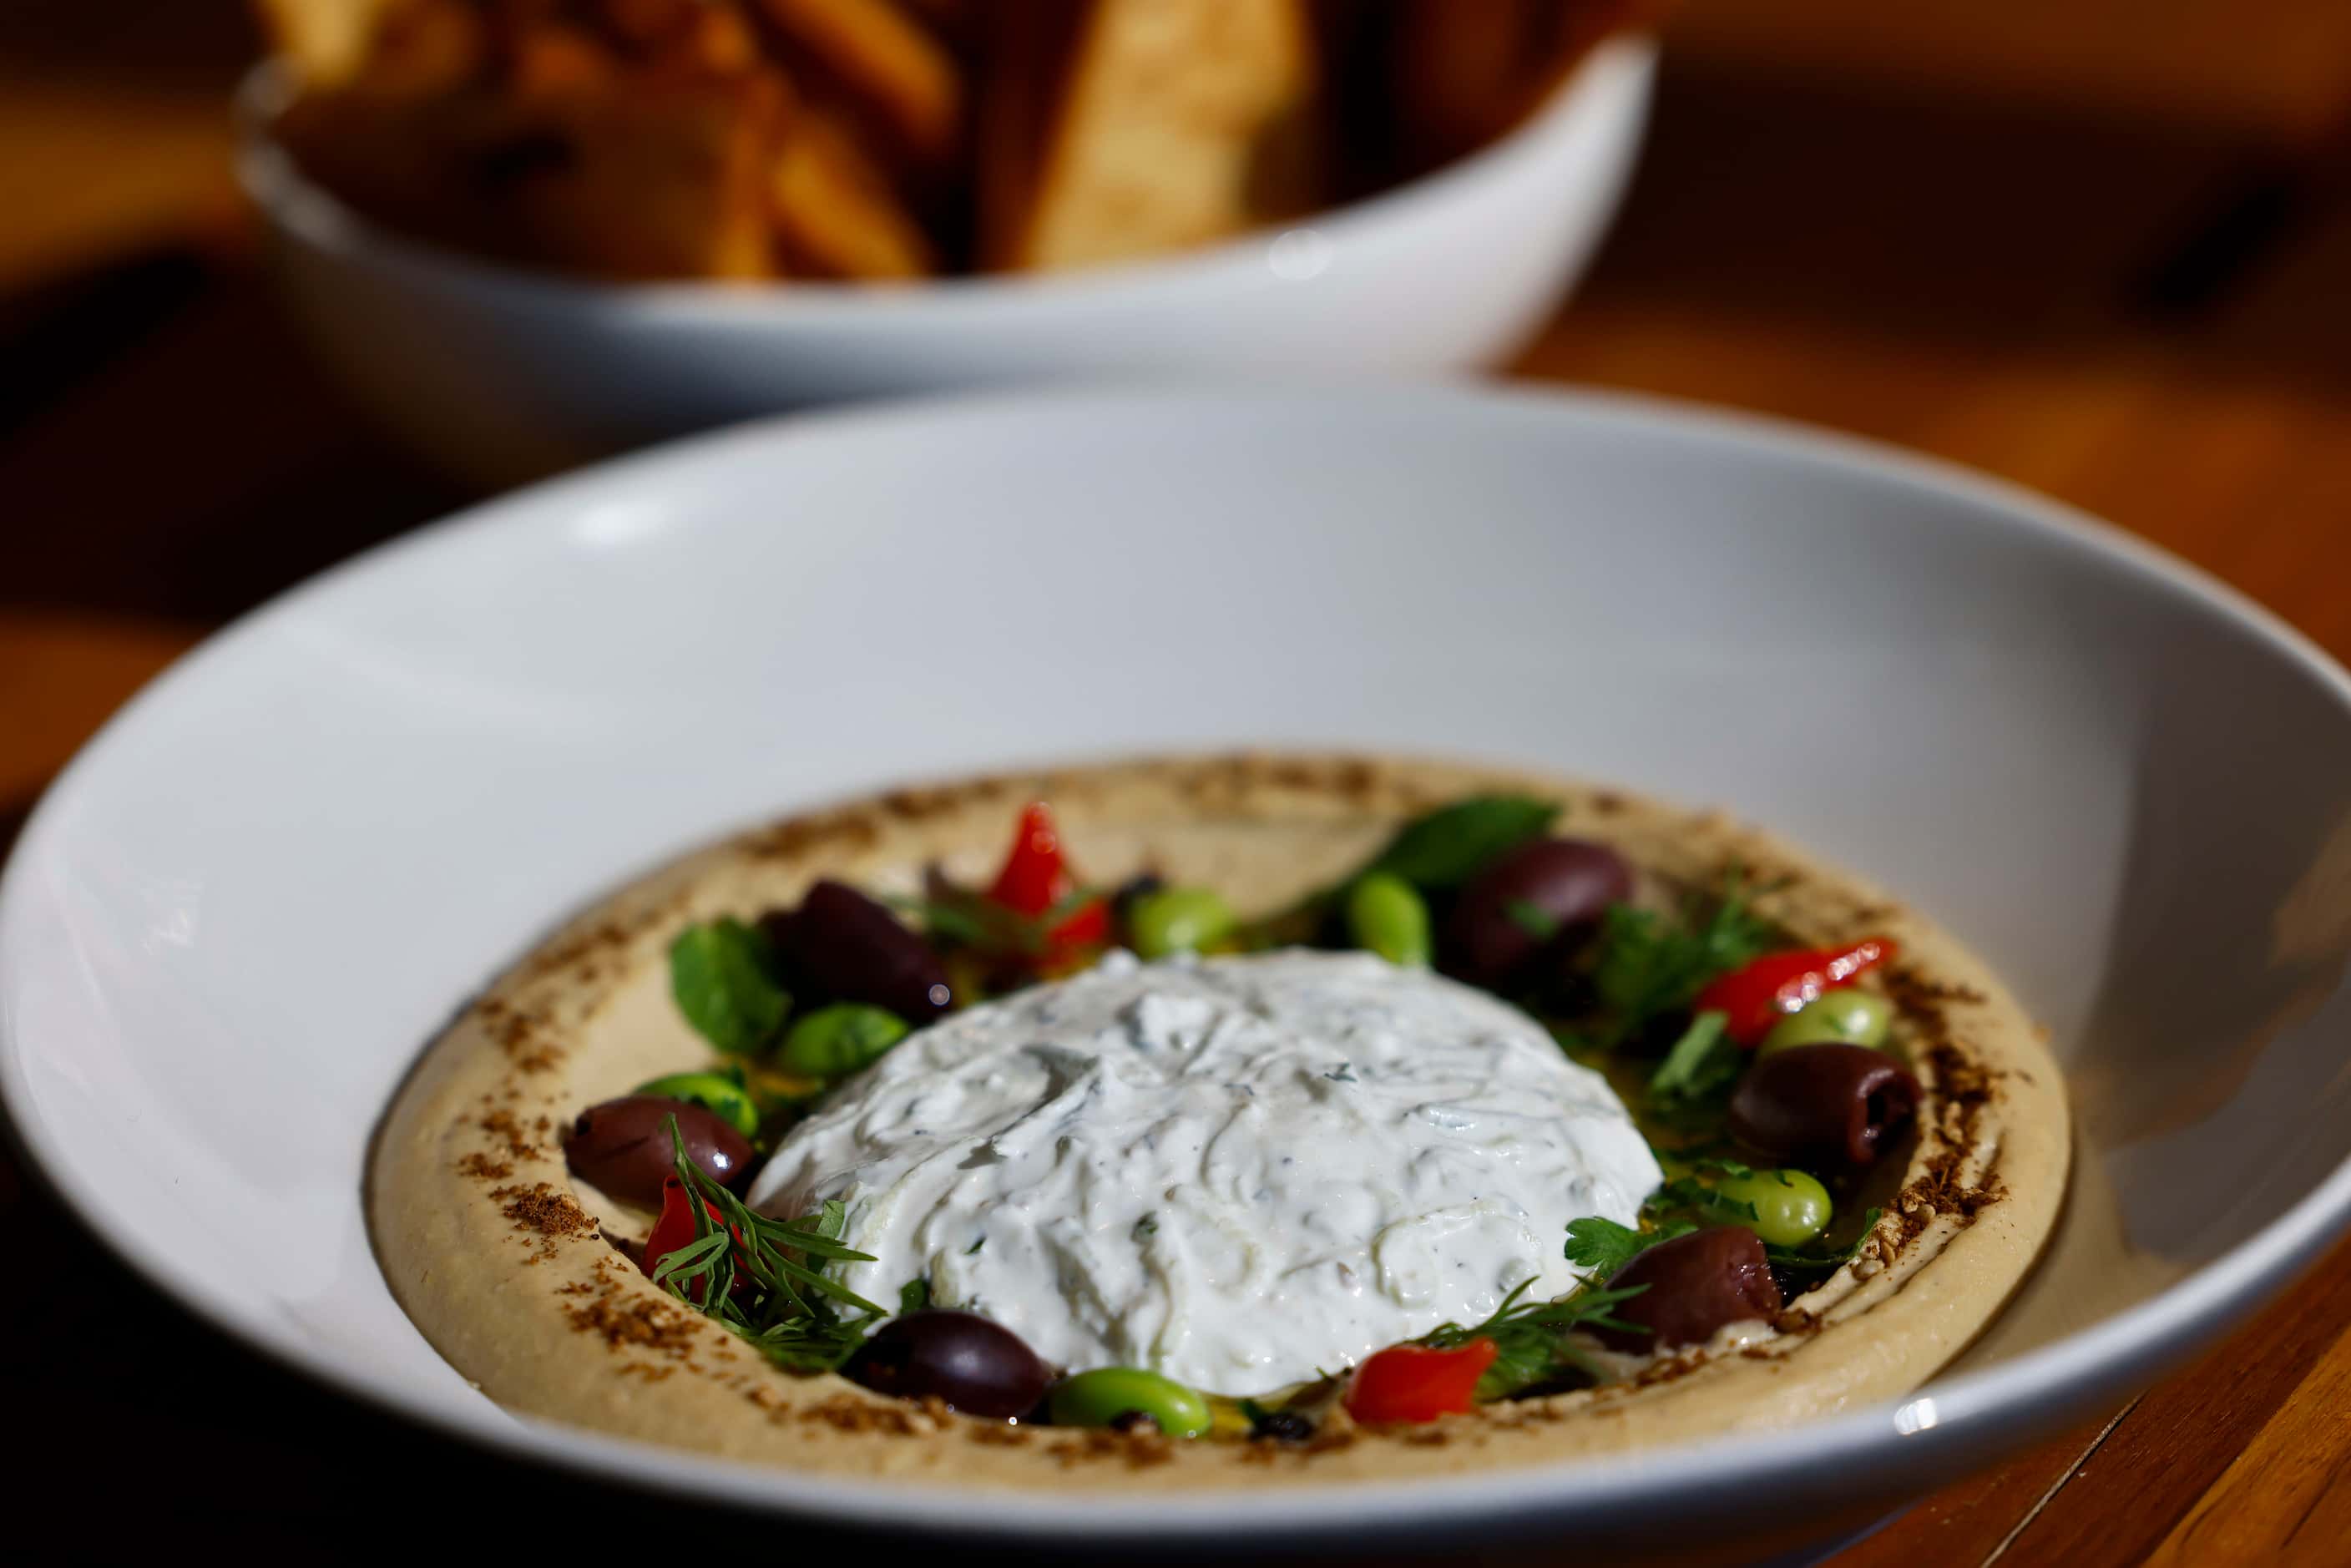 Hummus at Joey is made with tzatziki and dill and is served with pita crisps.